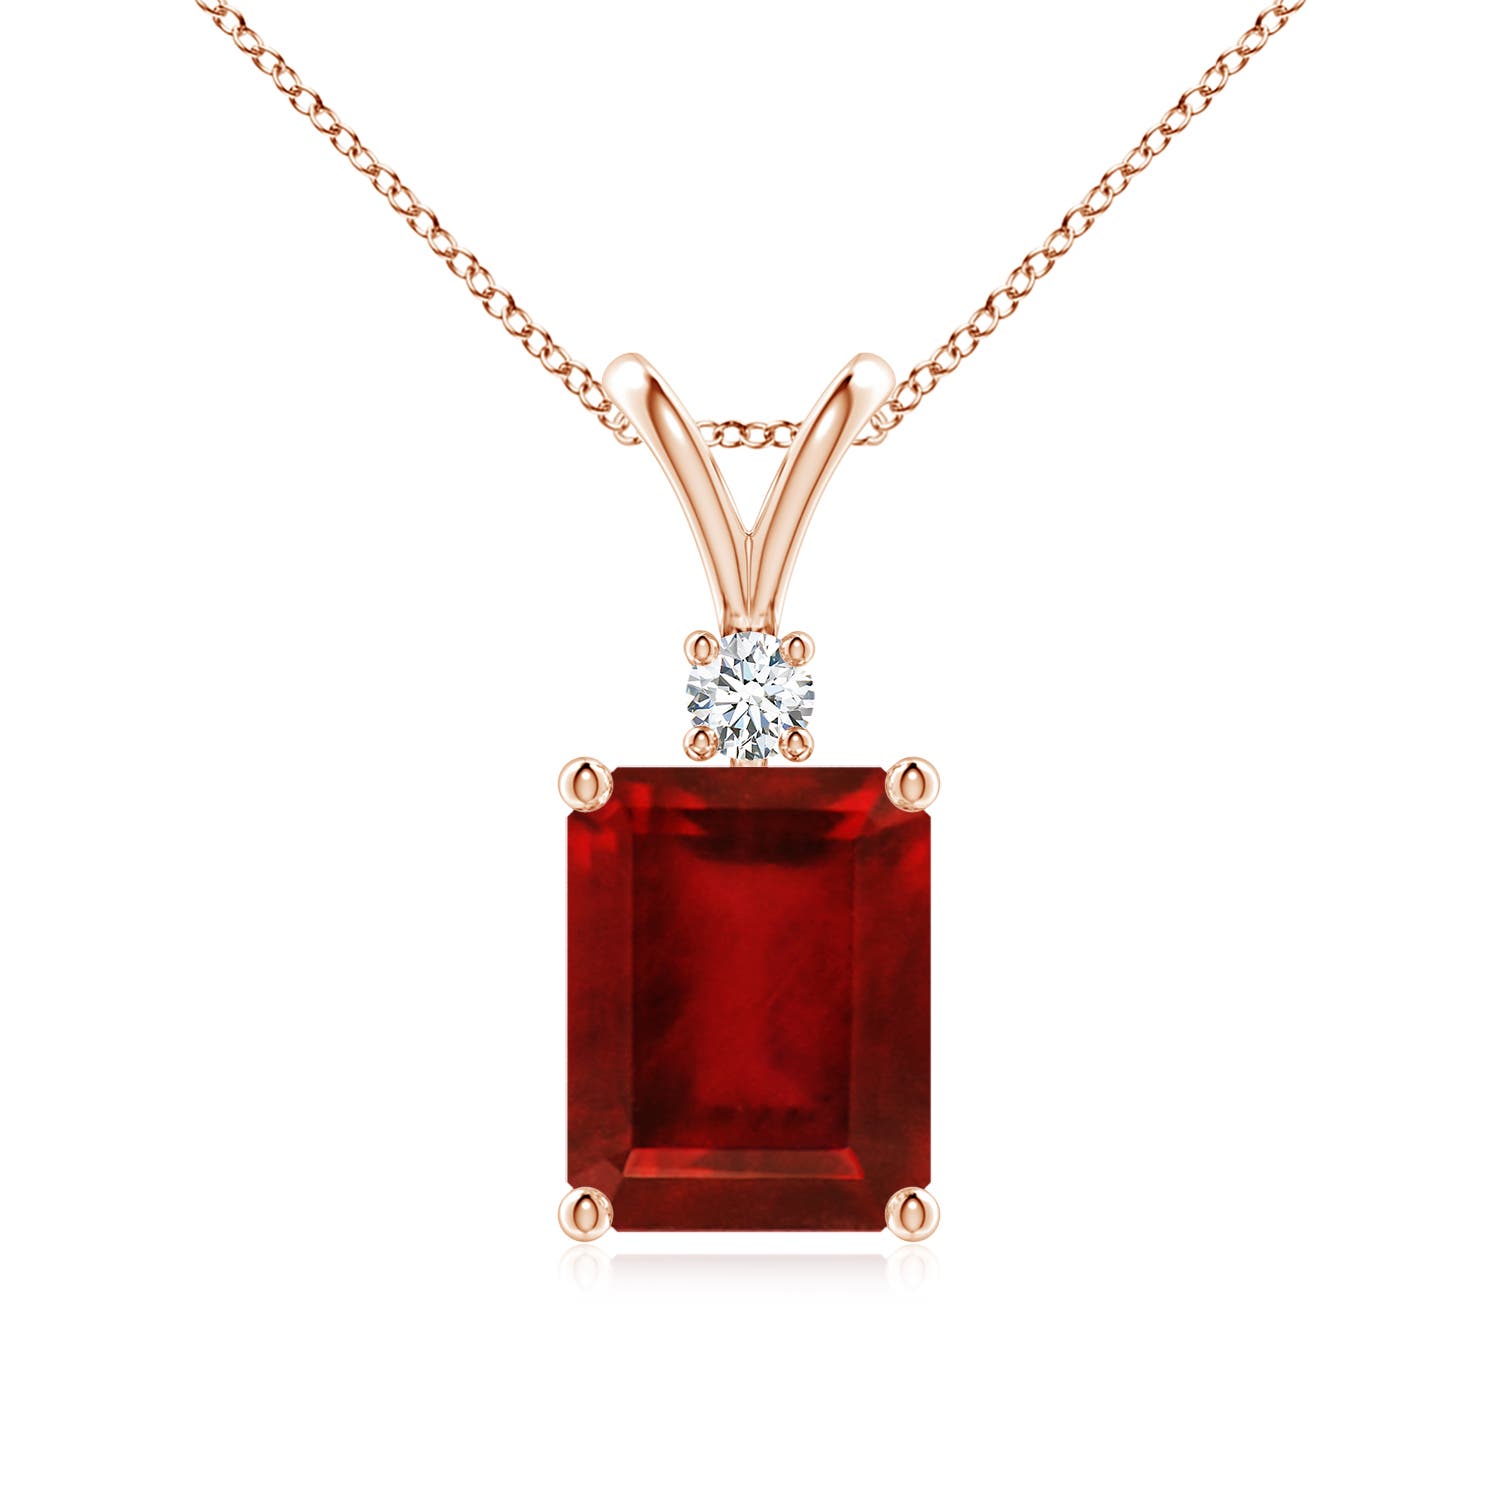 AAAA - Ruby / 3.07 CT / 14 KT Rose Gold